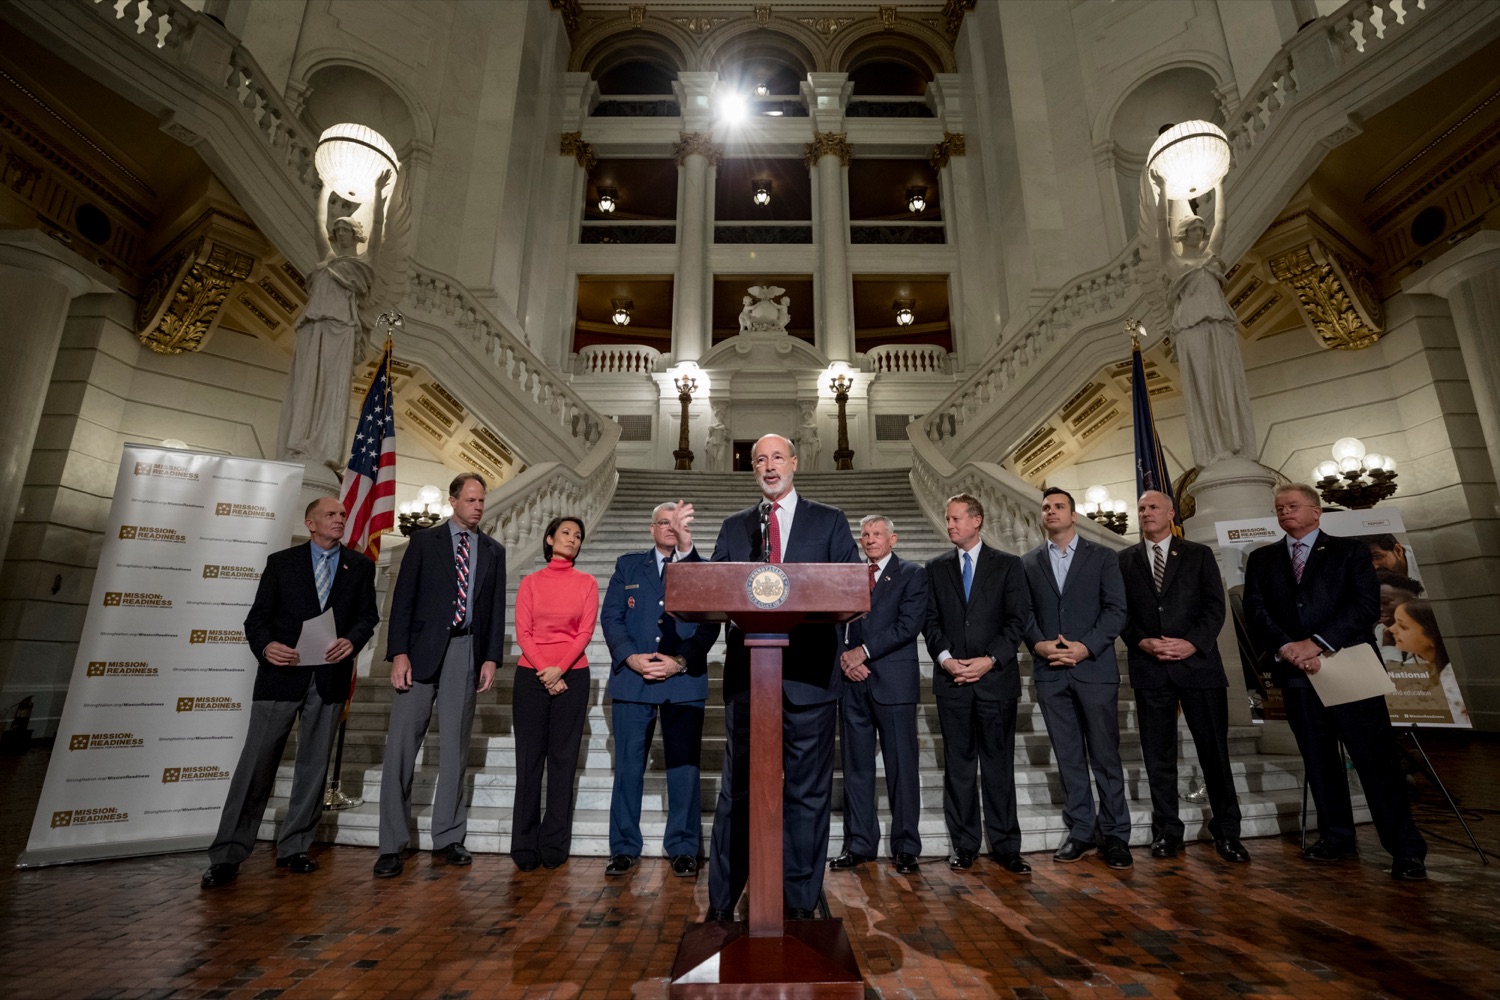 Pennsylvania Governor Tom Wolf speaks during a press conference outlining how competition for qualified individuals among all employment sectors affects military recruiting efforts and warrants greater investment in our next generation inside the Capitol Rotunda on Tuesday, November 12, 2019.<br><a href="https://filesource.amperwave.net/commonwealthofpa/photo/17588_GOV_Mission_Readiness_NK_002.JPG" target="_blank">⇣ Download Photo</a>